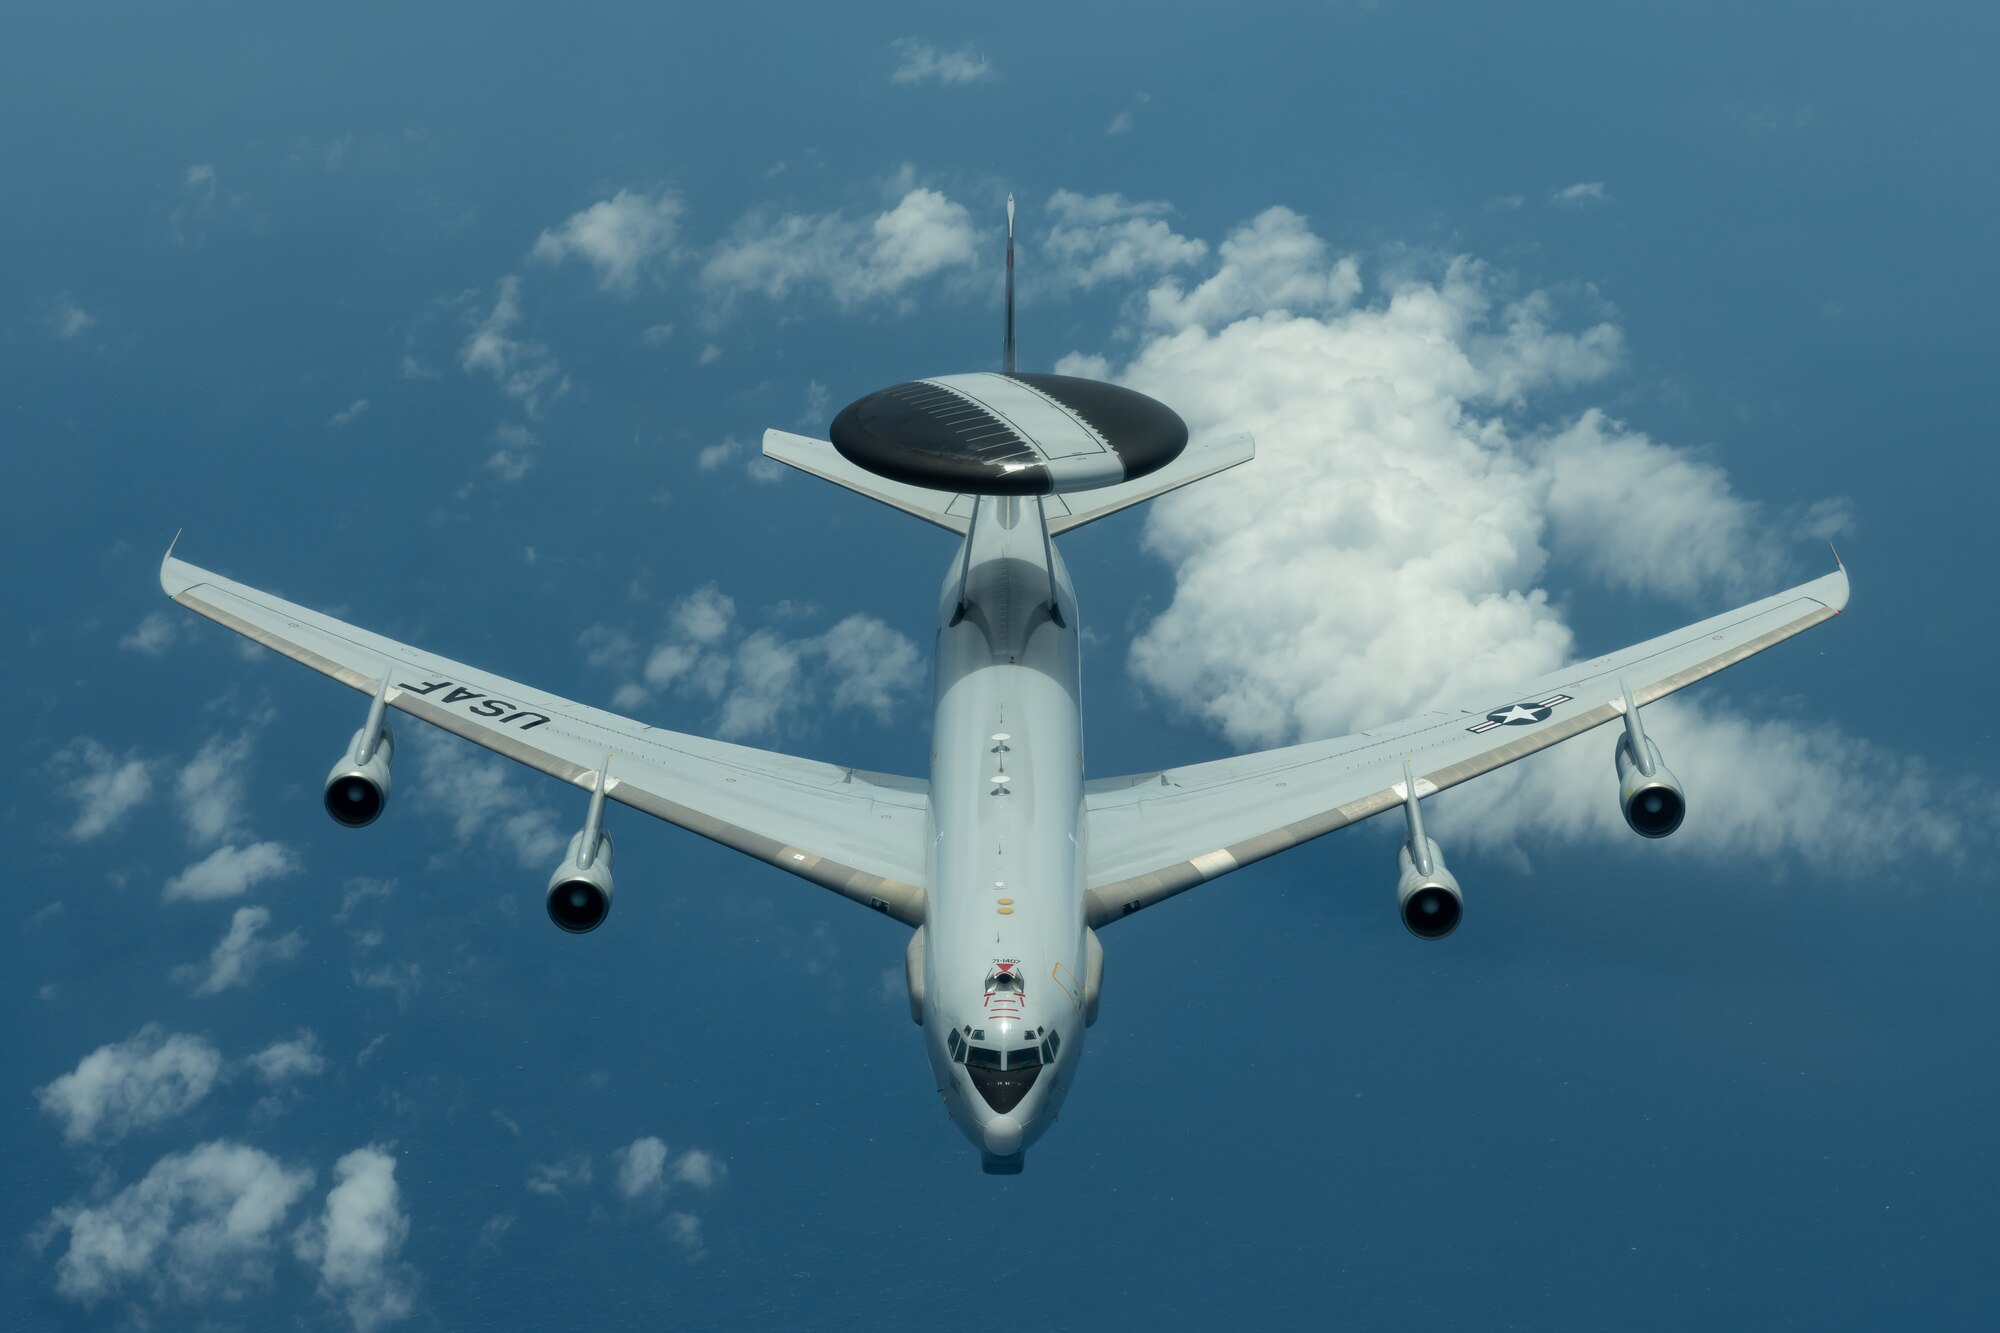 An E-3 Sentry from the 961st Airborne Air Control Squadron flies during a training exercise July 10, 2019, out of Kadena Air Base, Japan. The Sentry provides all-weather surveillance, command, control, and communications in support of a free and open Indo-Pacific. (U.S. Air Force photo by Airman 1st Class Matthew Seefeldt)